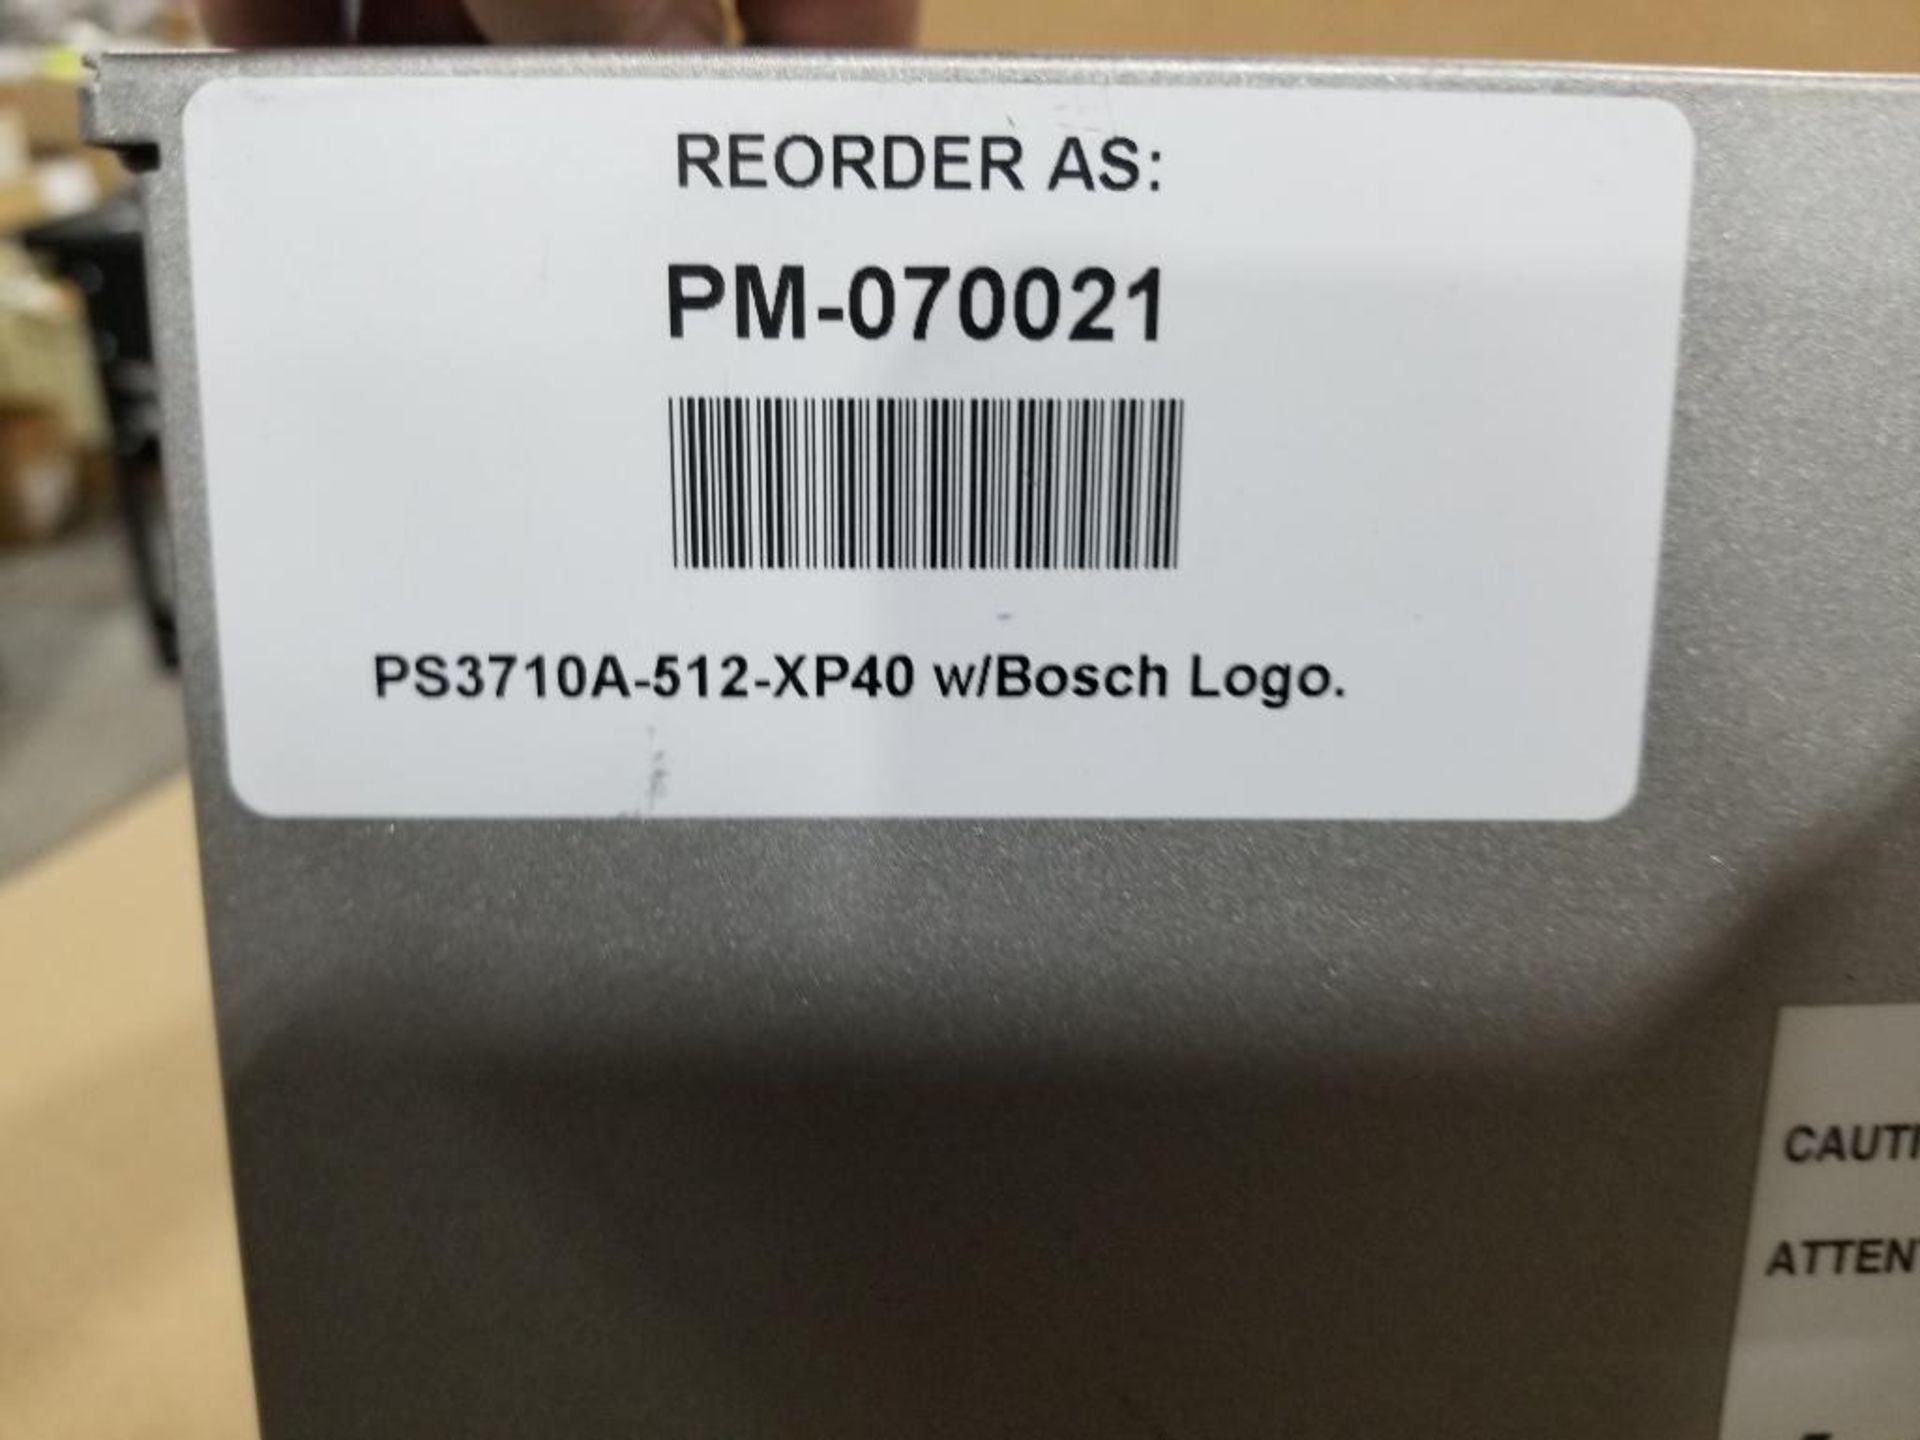 ProFace human machine interface. Model number 3580301-02. Part number PS3710A-T41-PA1. - Image 5 of 11